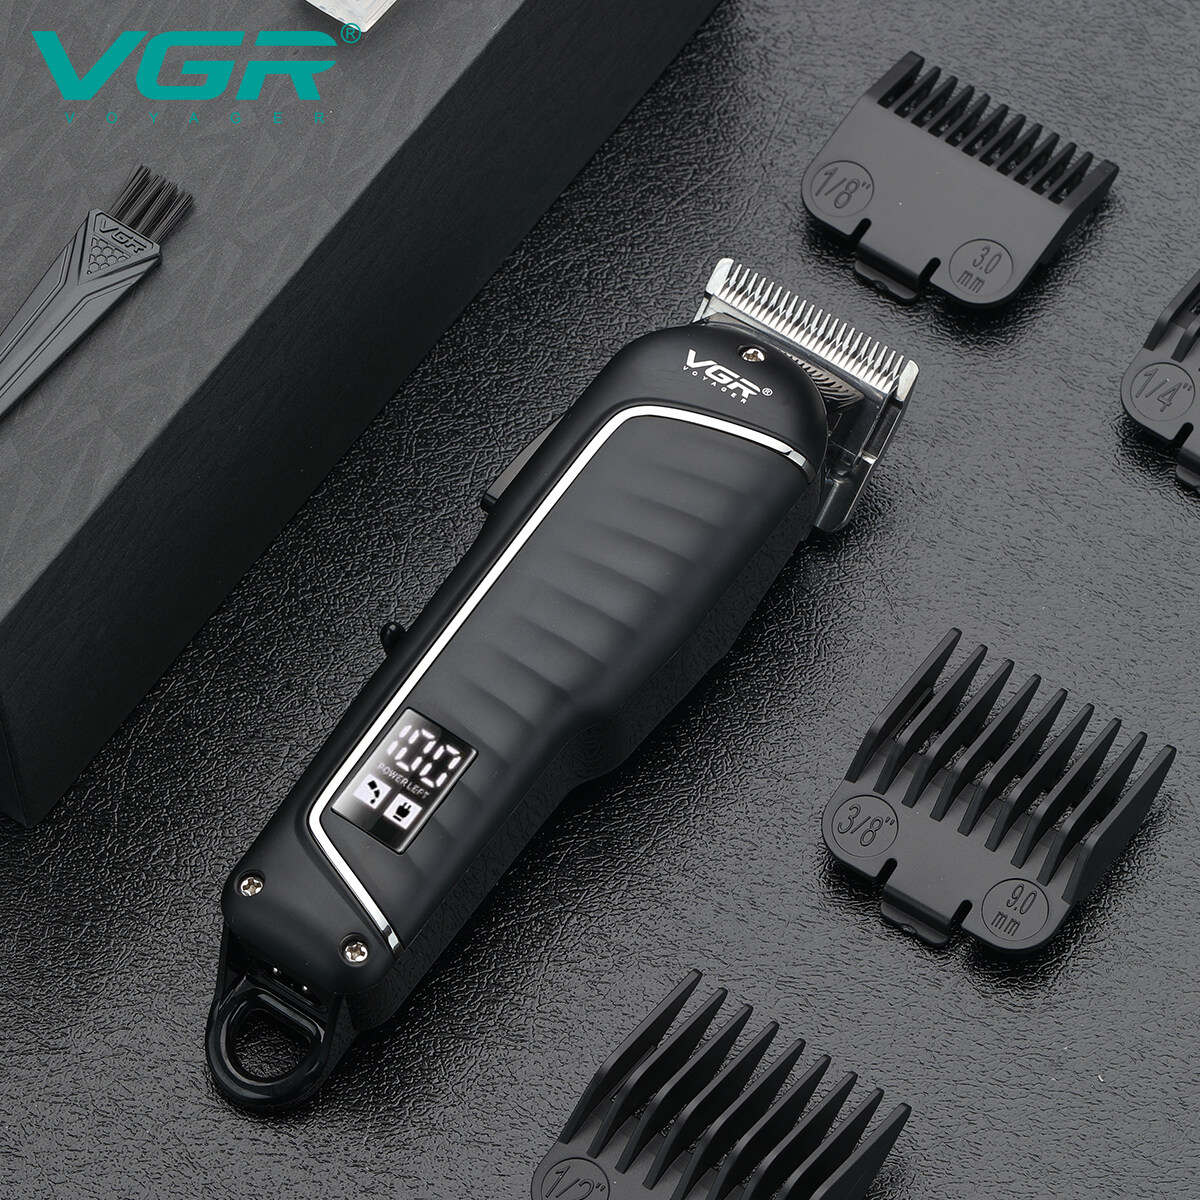 best barber clippers brand, cheap barber clippers wholesale, barber clippers factory, barber clippers wholesale, barber outliners clippers wholesale